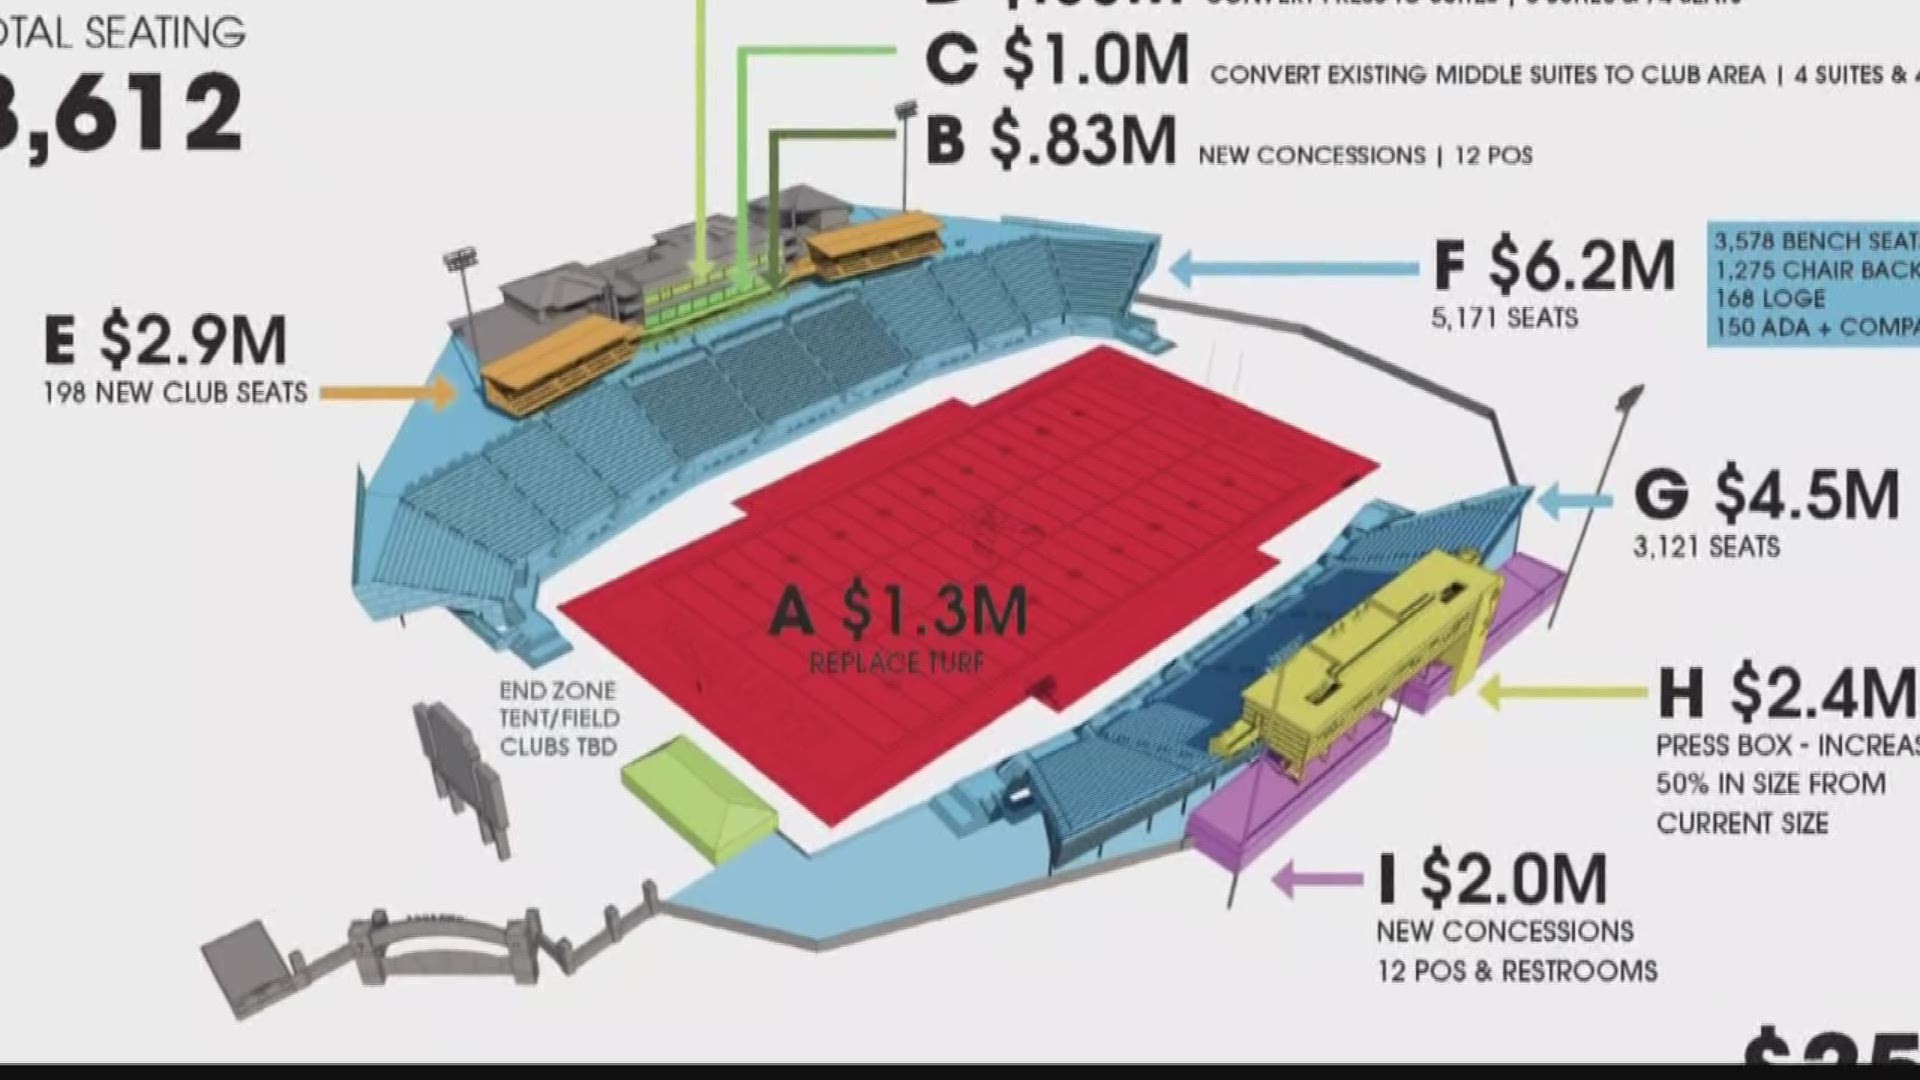 Today, a task force made recommendations to the EWU board of trustees to make the stadium look like the renderings.